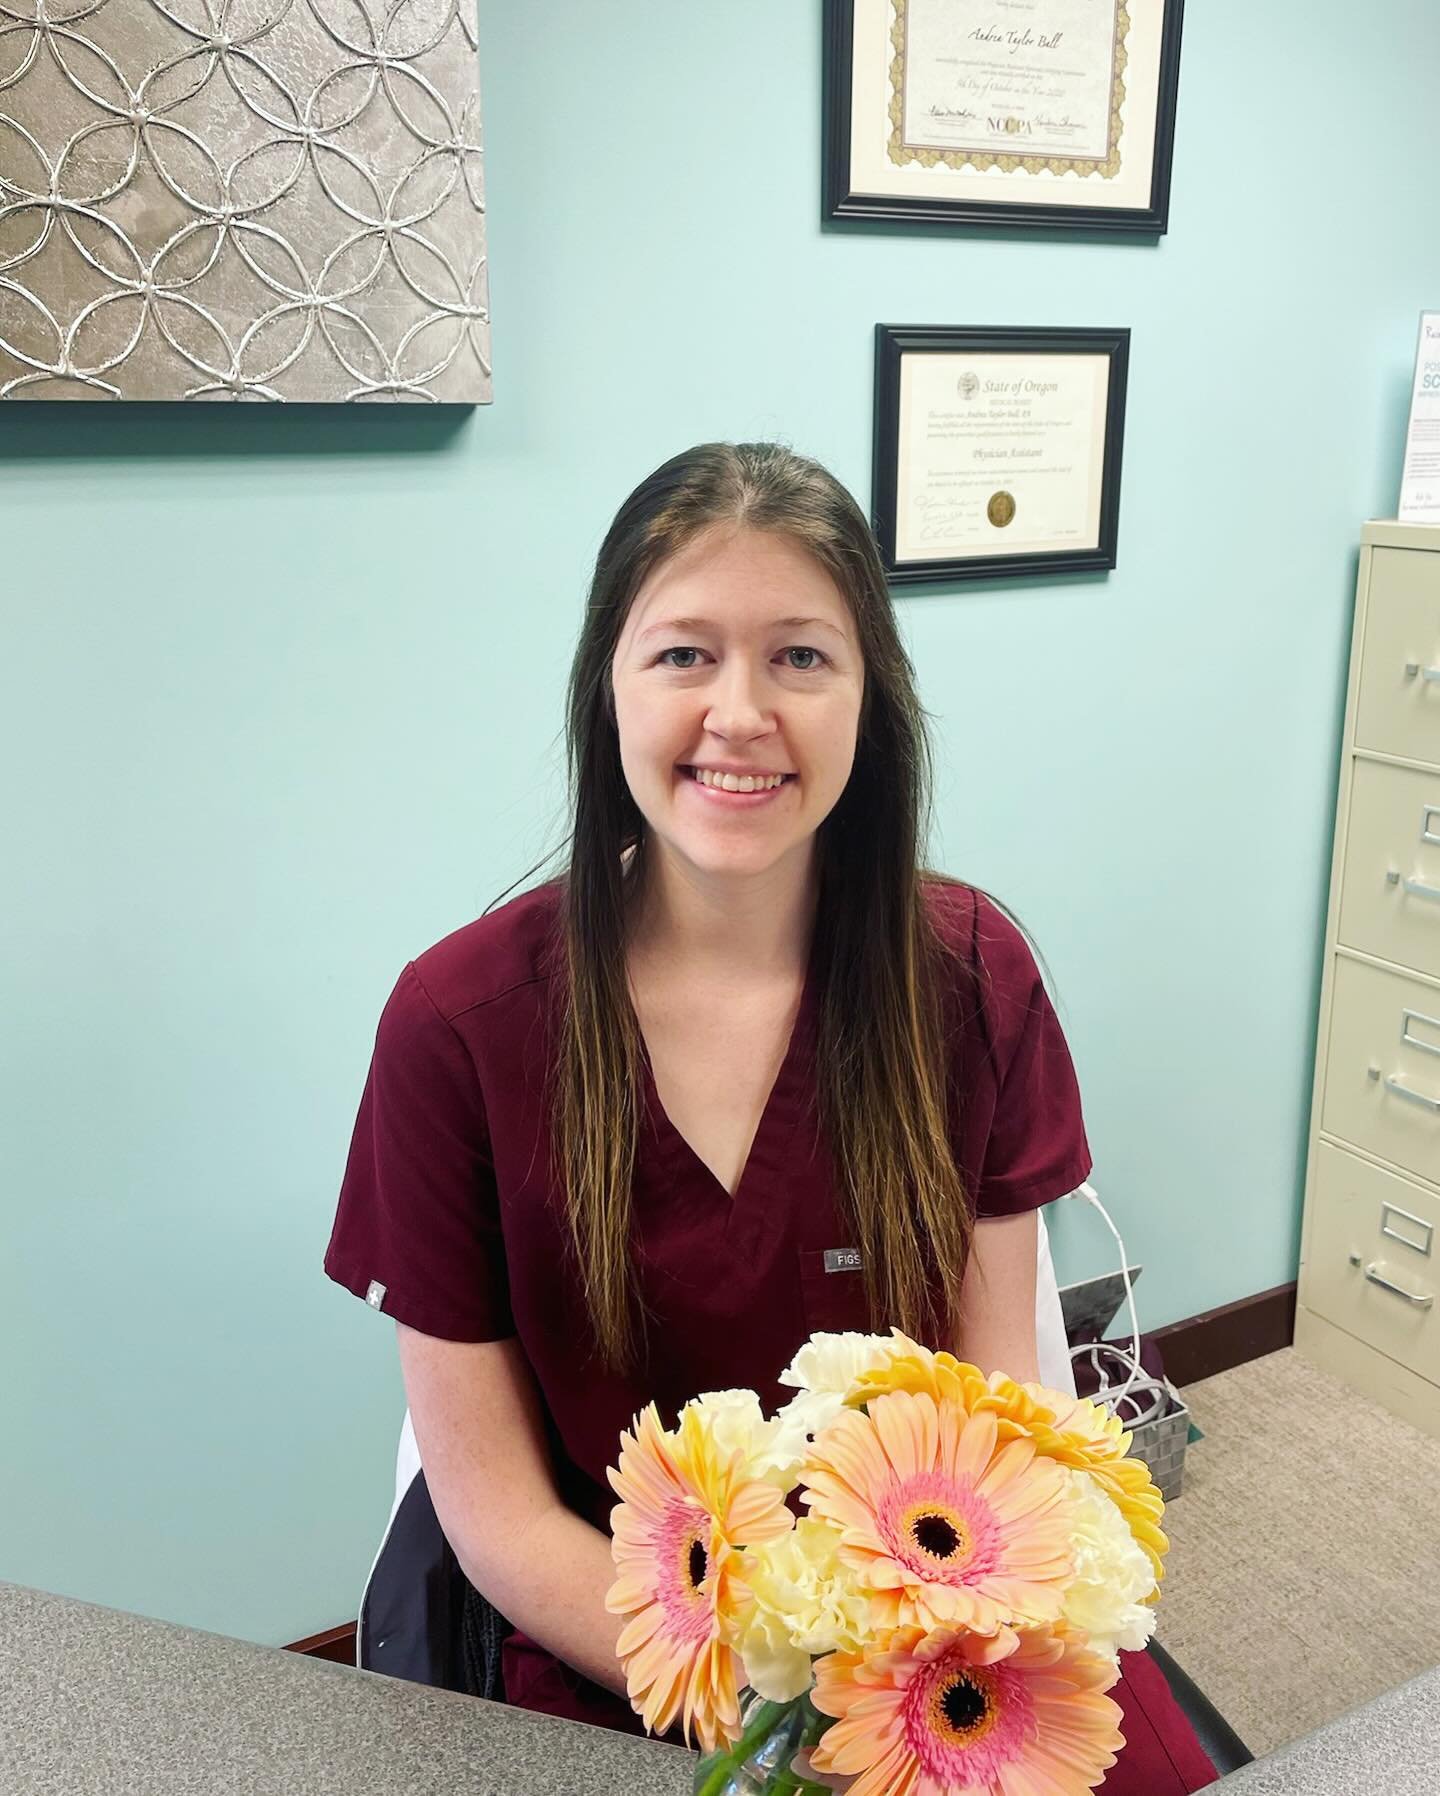 Happy 30th Birthday to our favorite Physician Assistant, Andrea! 🎈🎂🍰🥳

Your hard work, compassion, and expertise make a real difference at the office and with our patients. Thank you for all that you do! May this year bring you countless reasons 